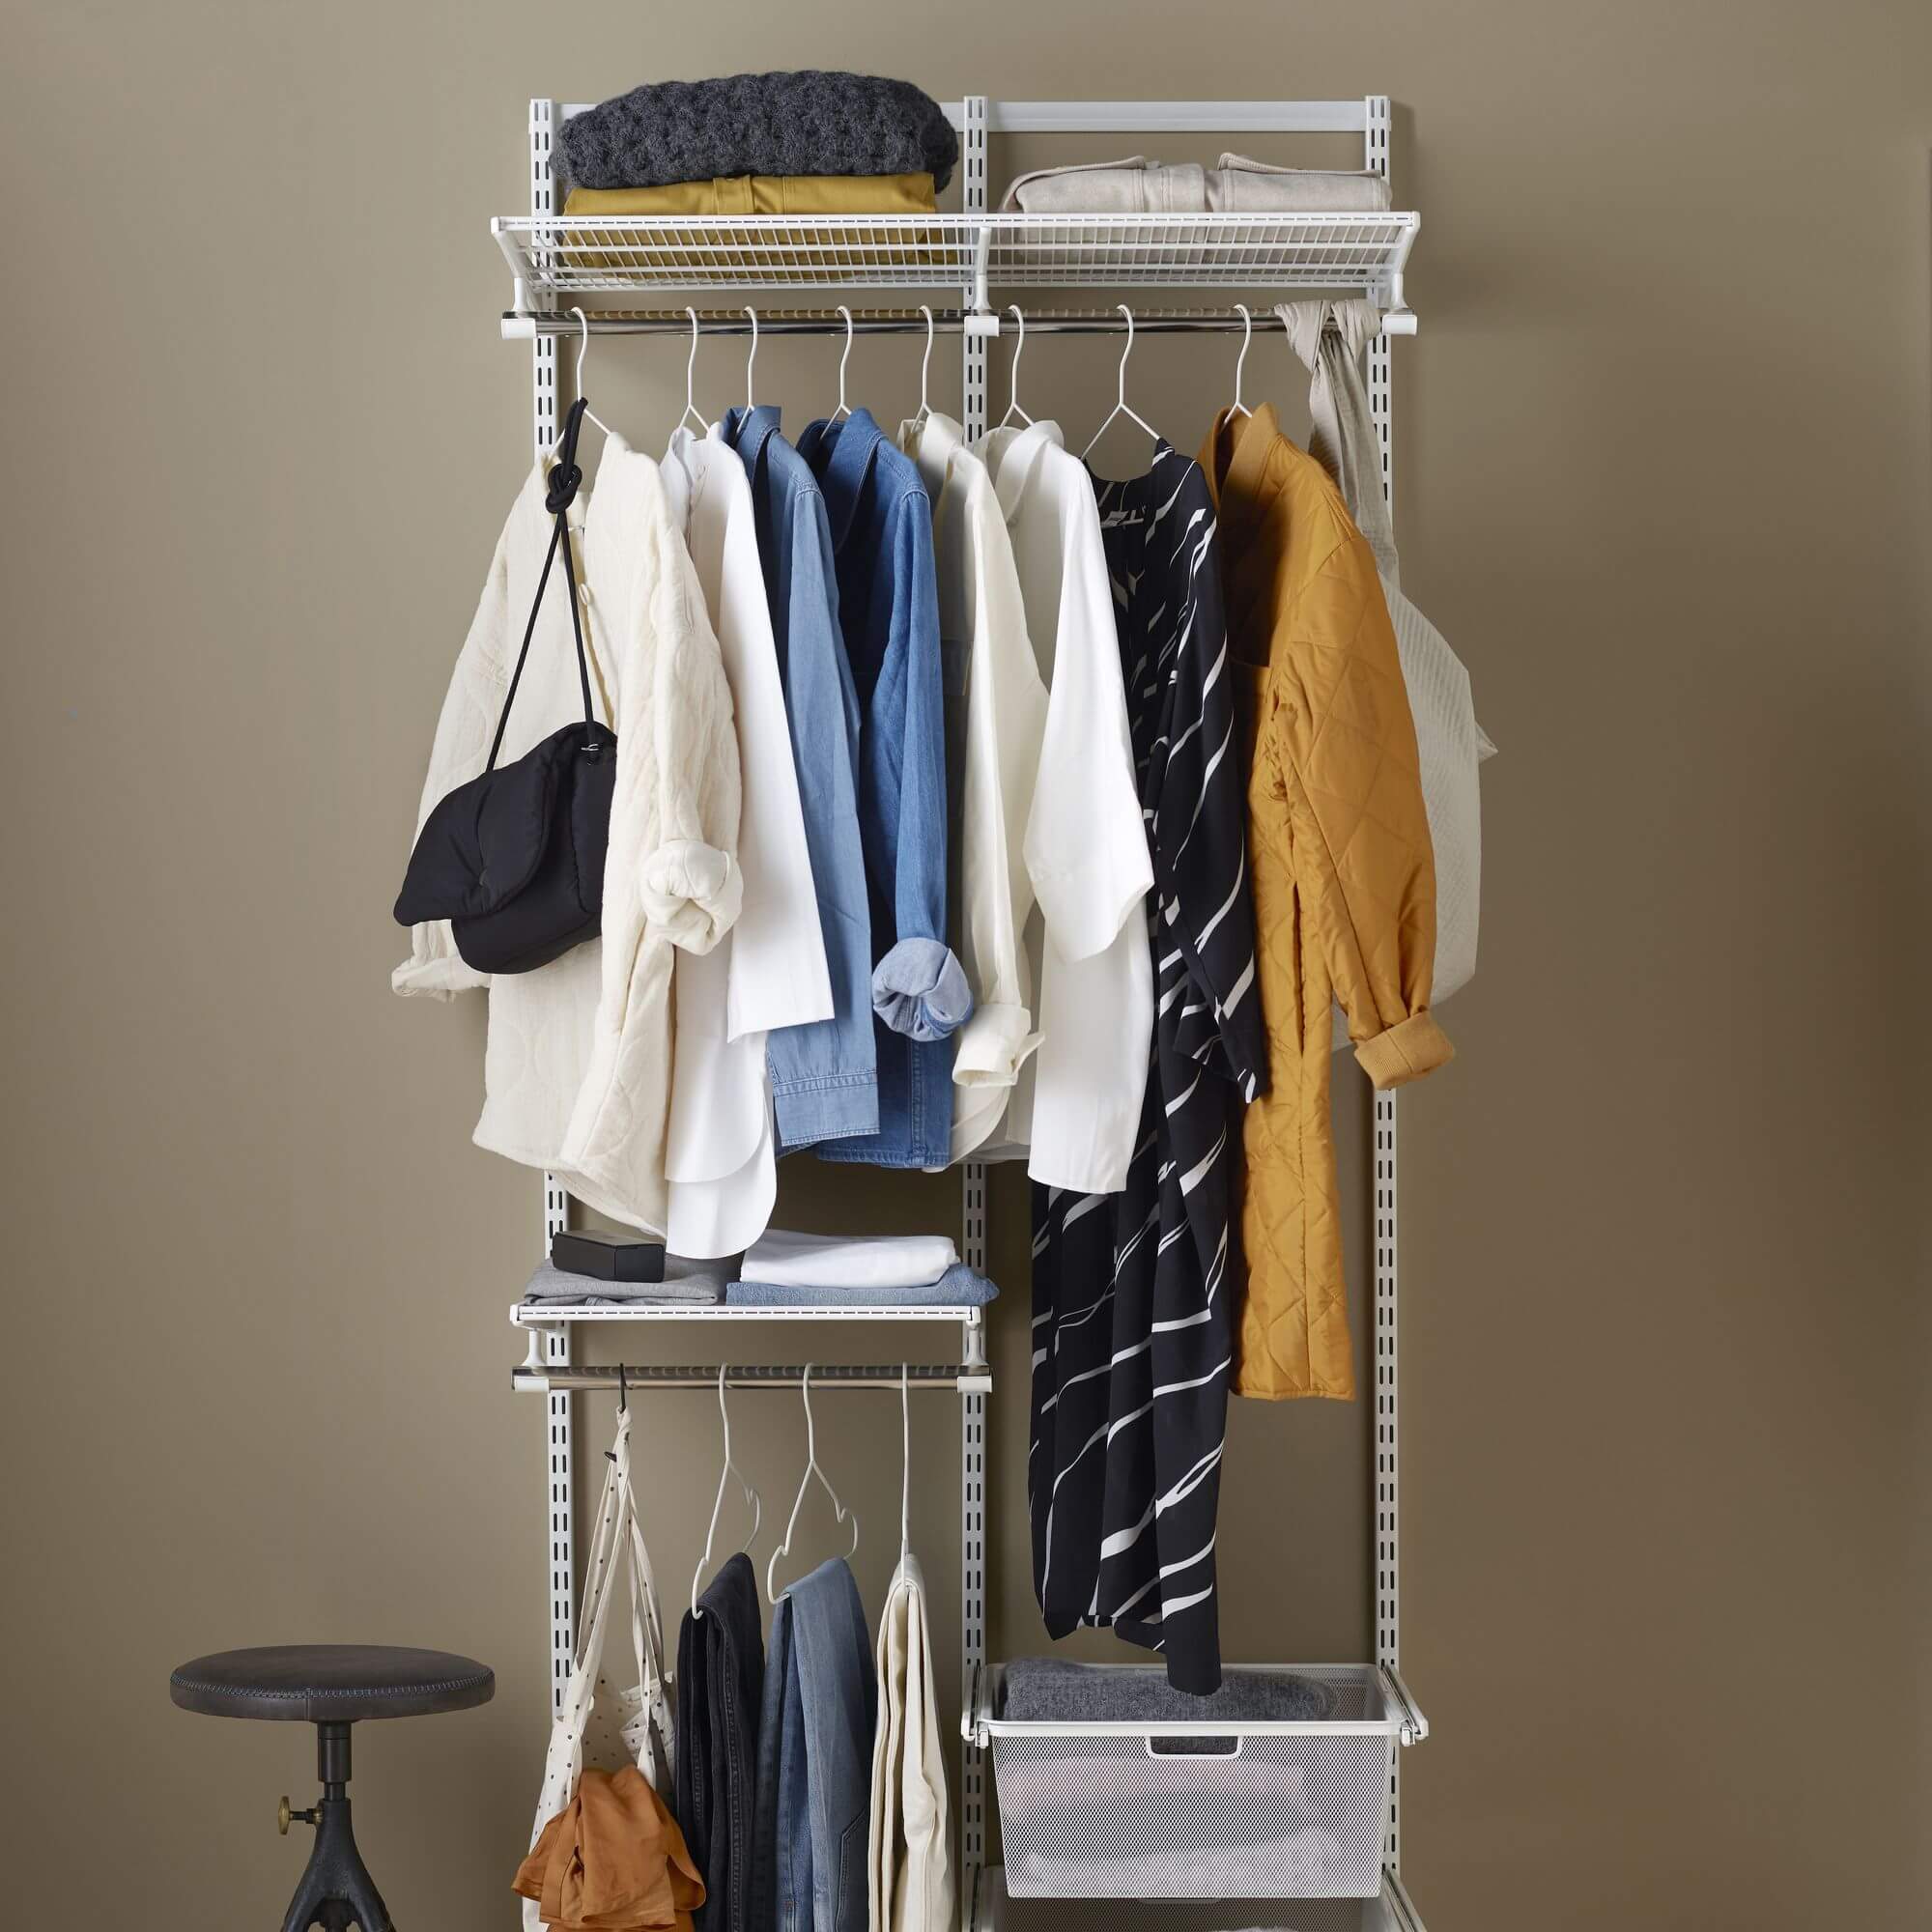 A white Elfa wardrobe shelving system with shelves, hanging rail and gliding drawer